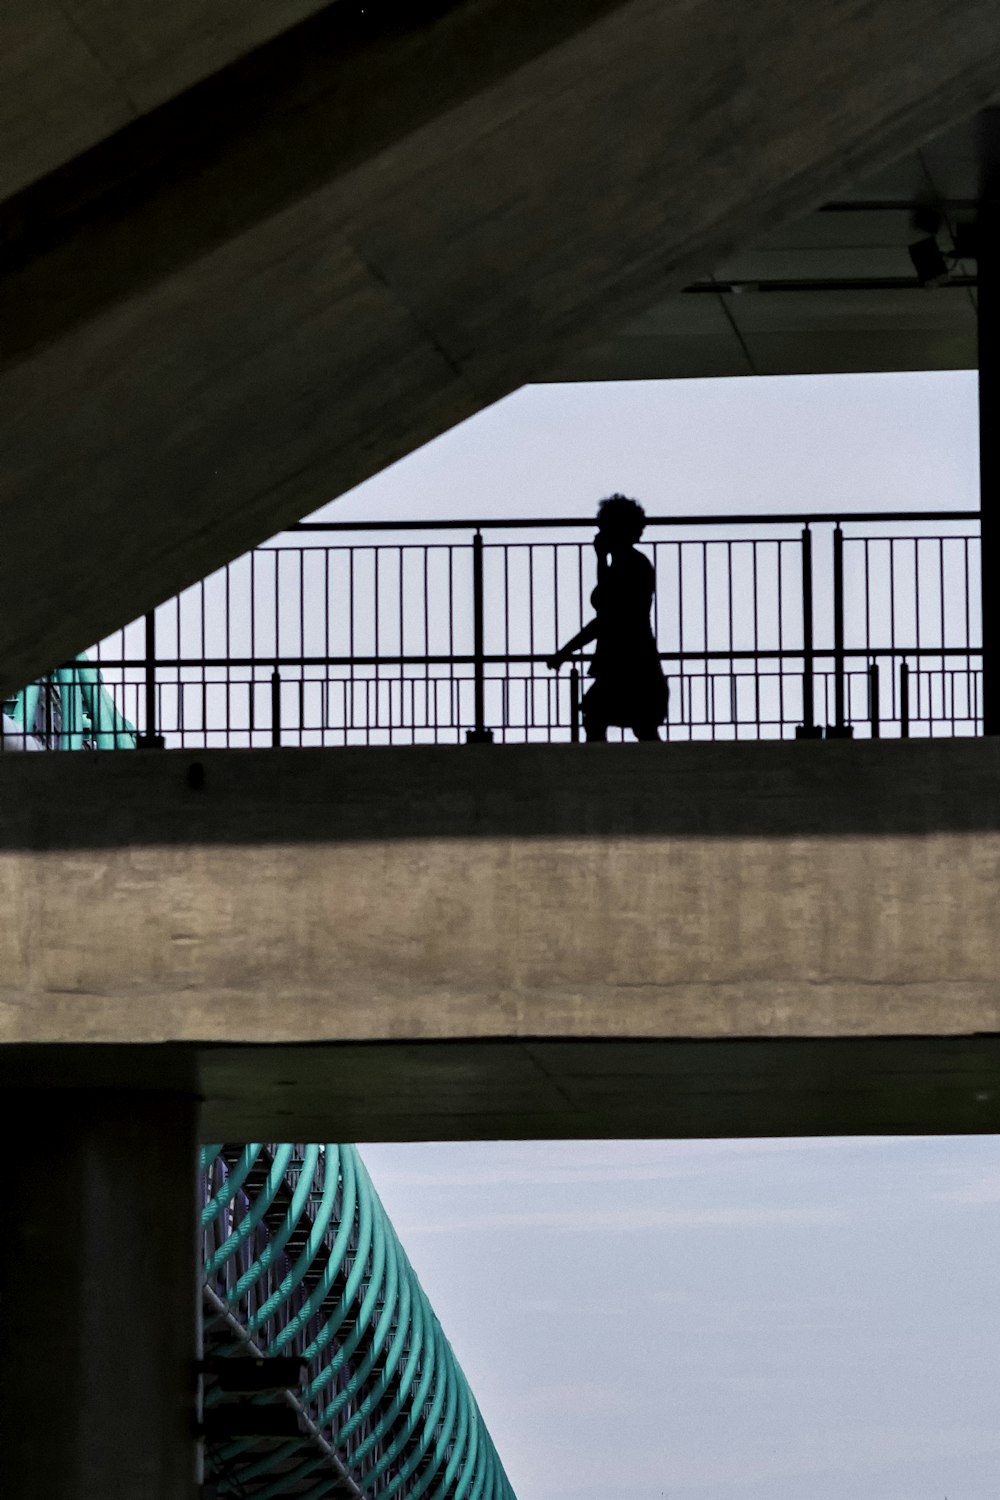 low angle of person crossing overpass